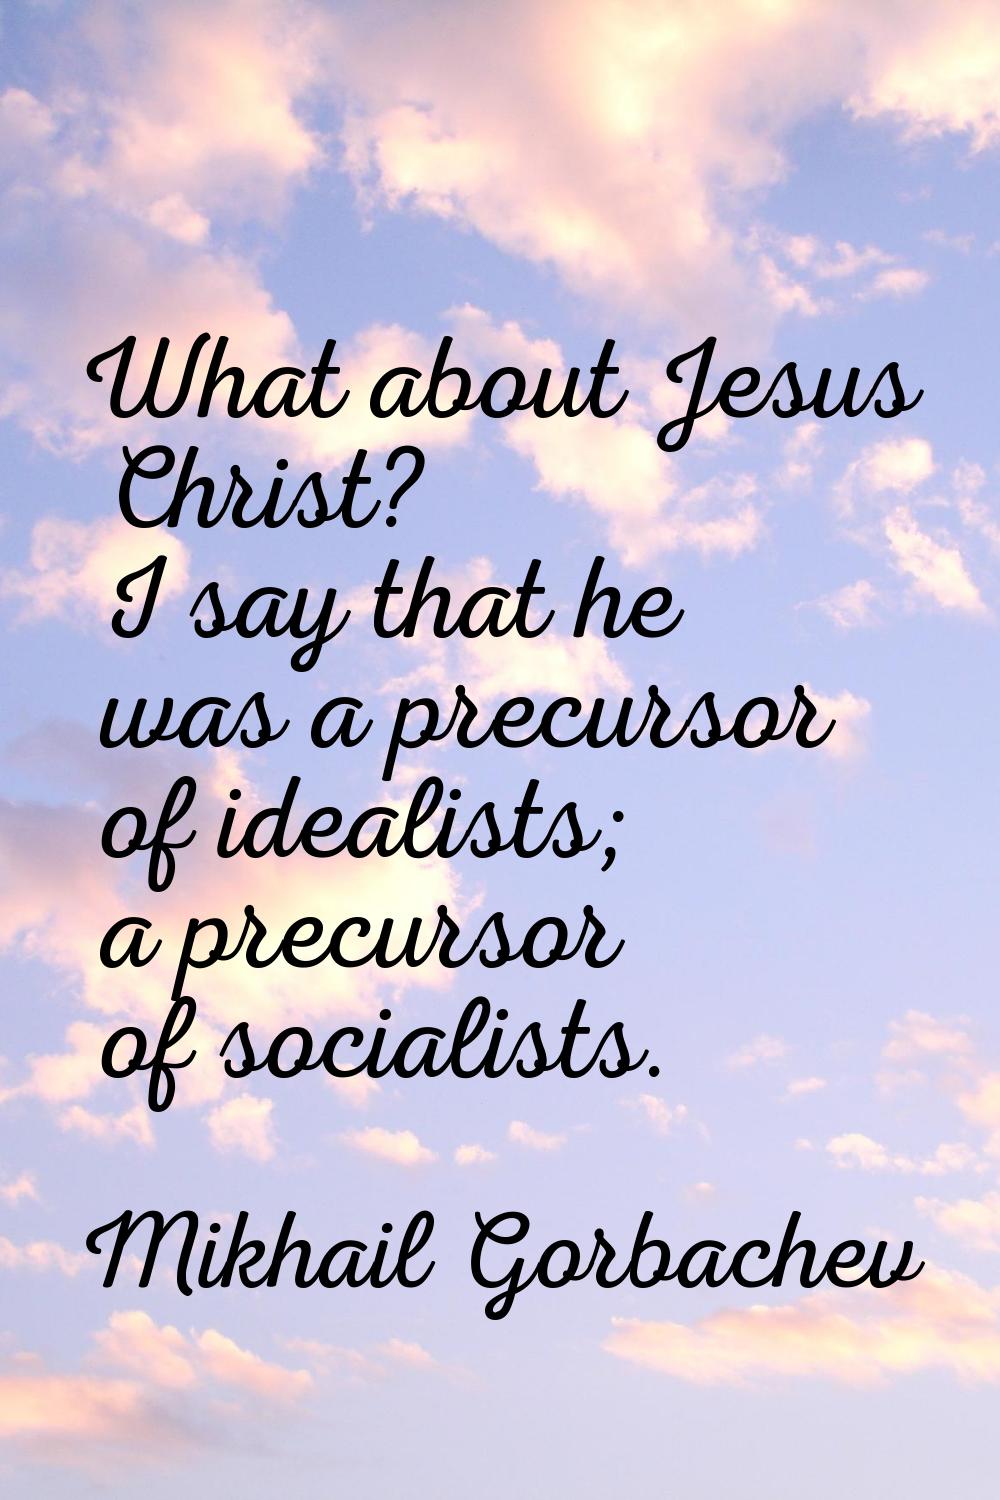 What about Jesus Christ? I say that he was a precursor of idealists; a precursor of socialists.